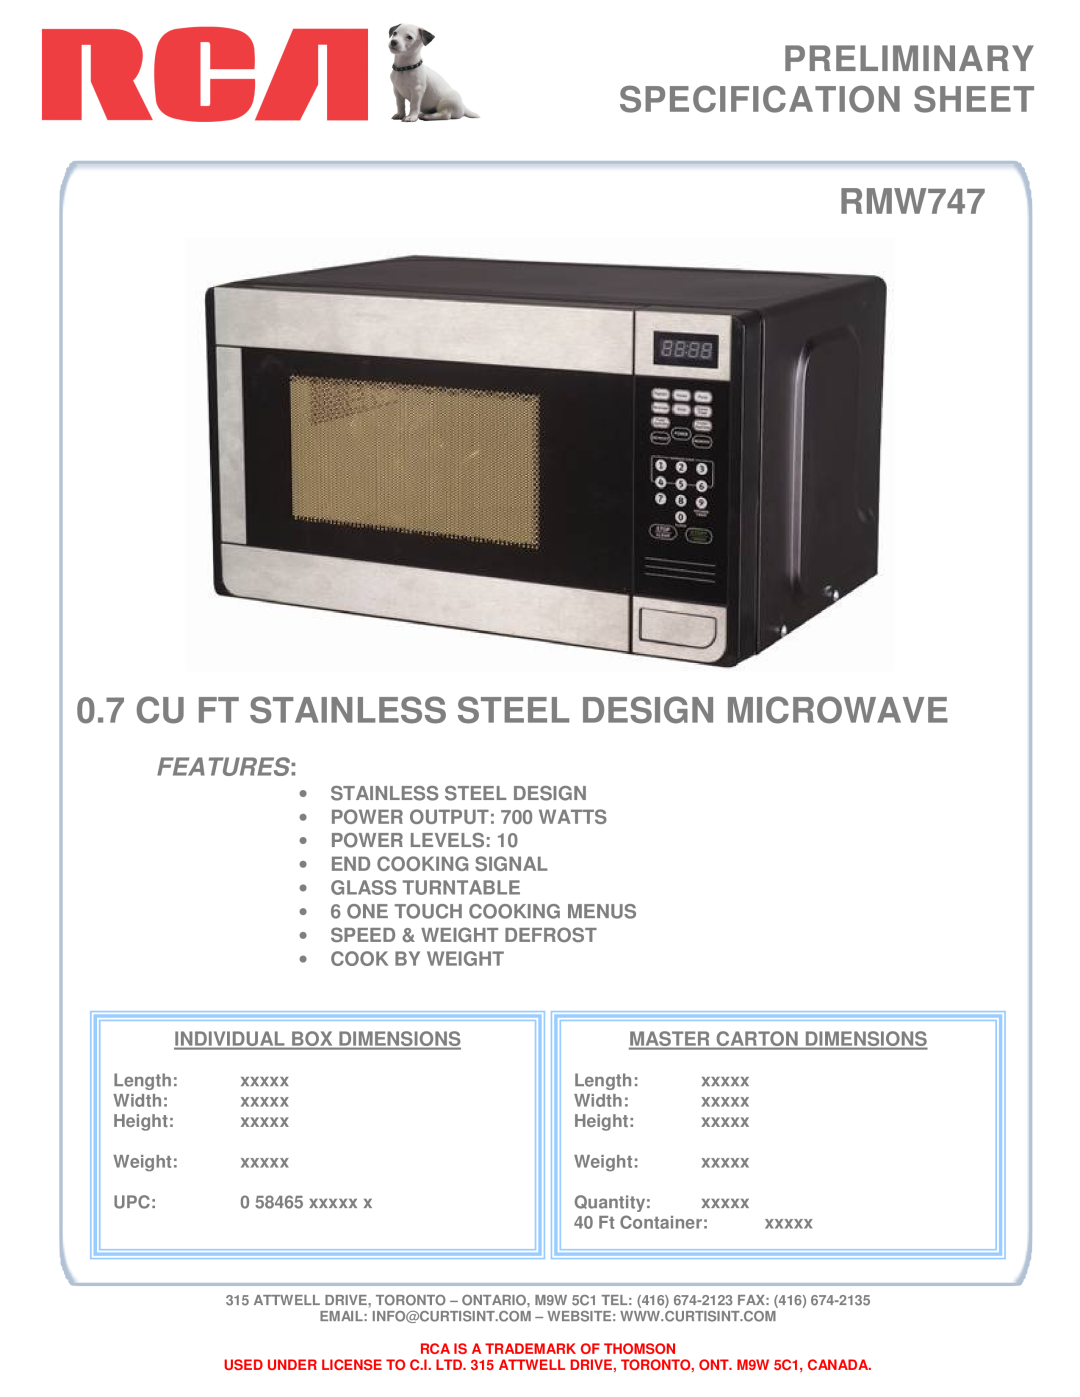 RCA dimensions PRELIMINARY SPECIFICATION SHEET RMW747, Cu Ft Stainless Steel Design Microwave, Features 